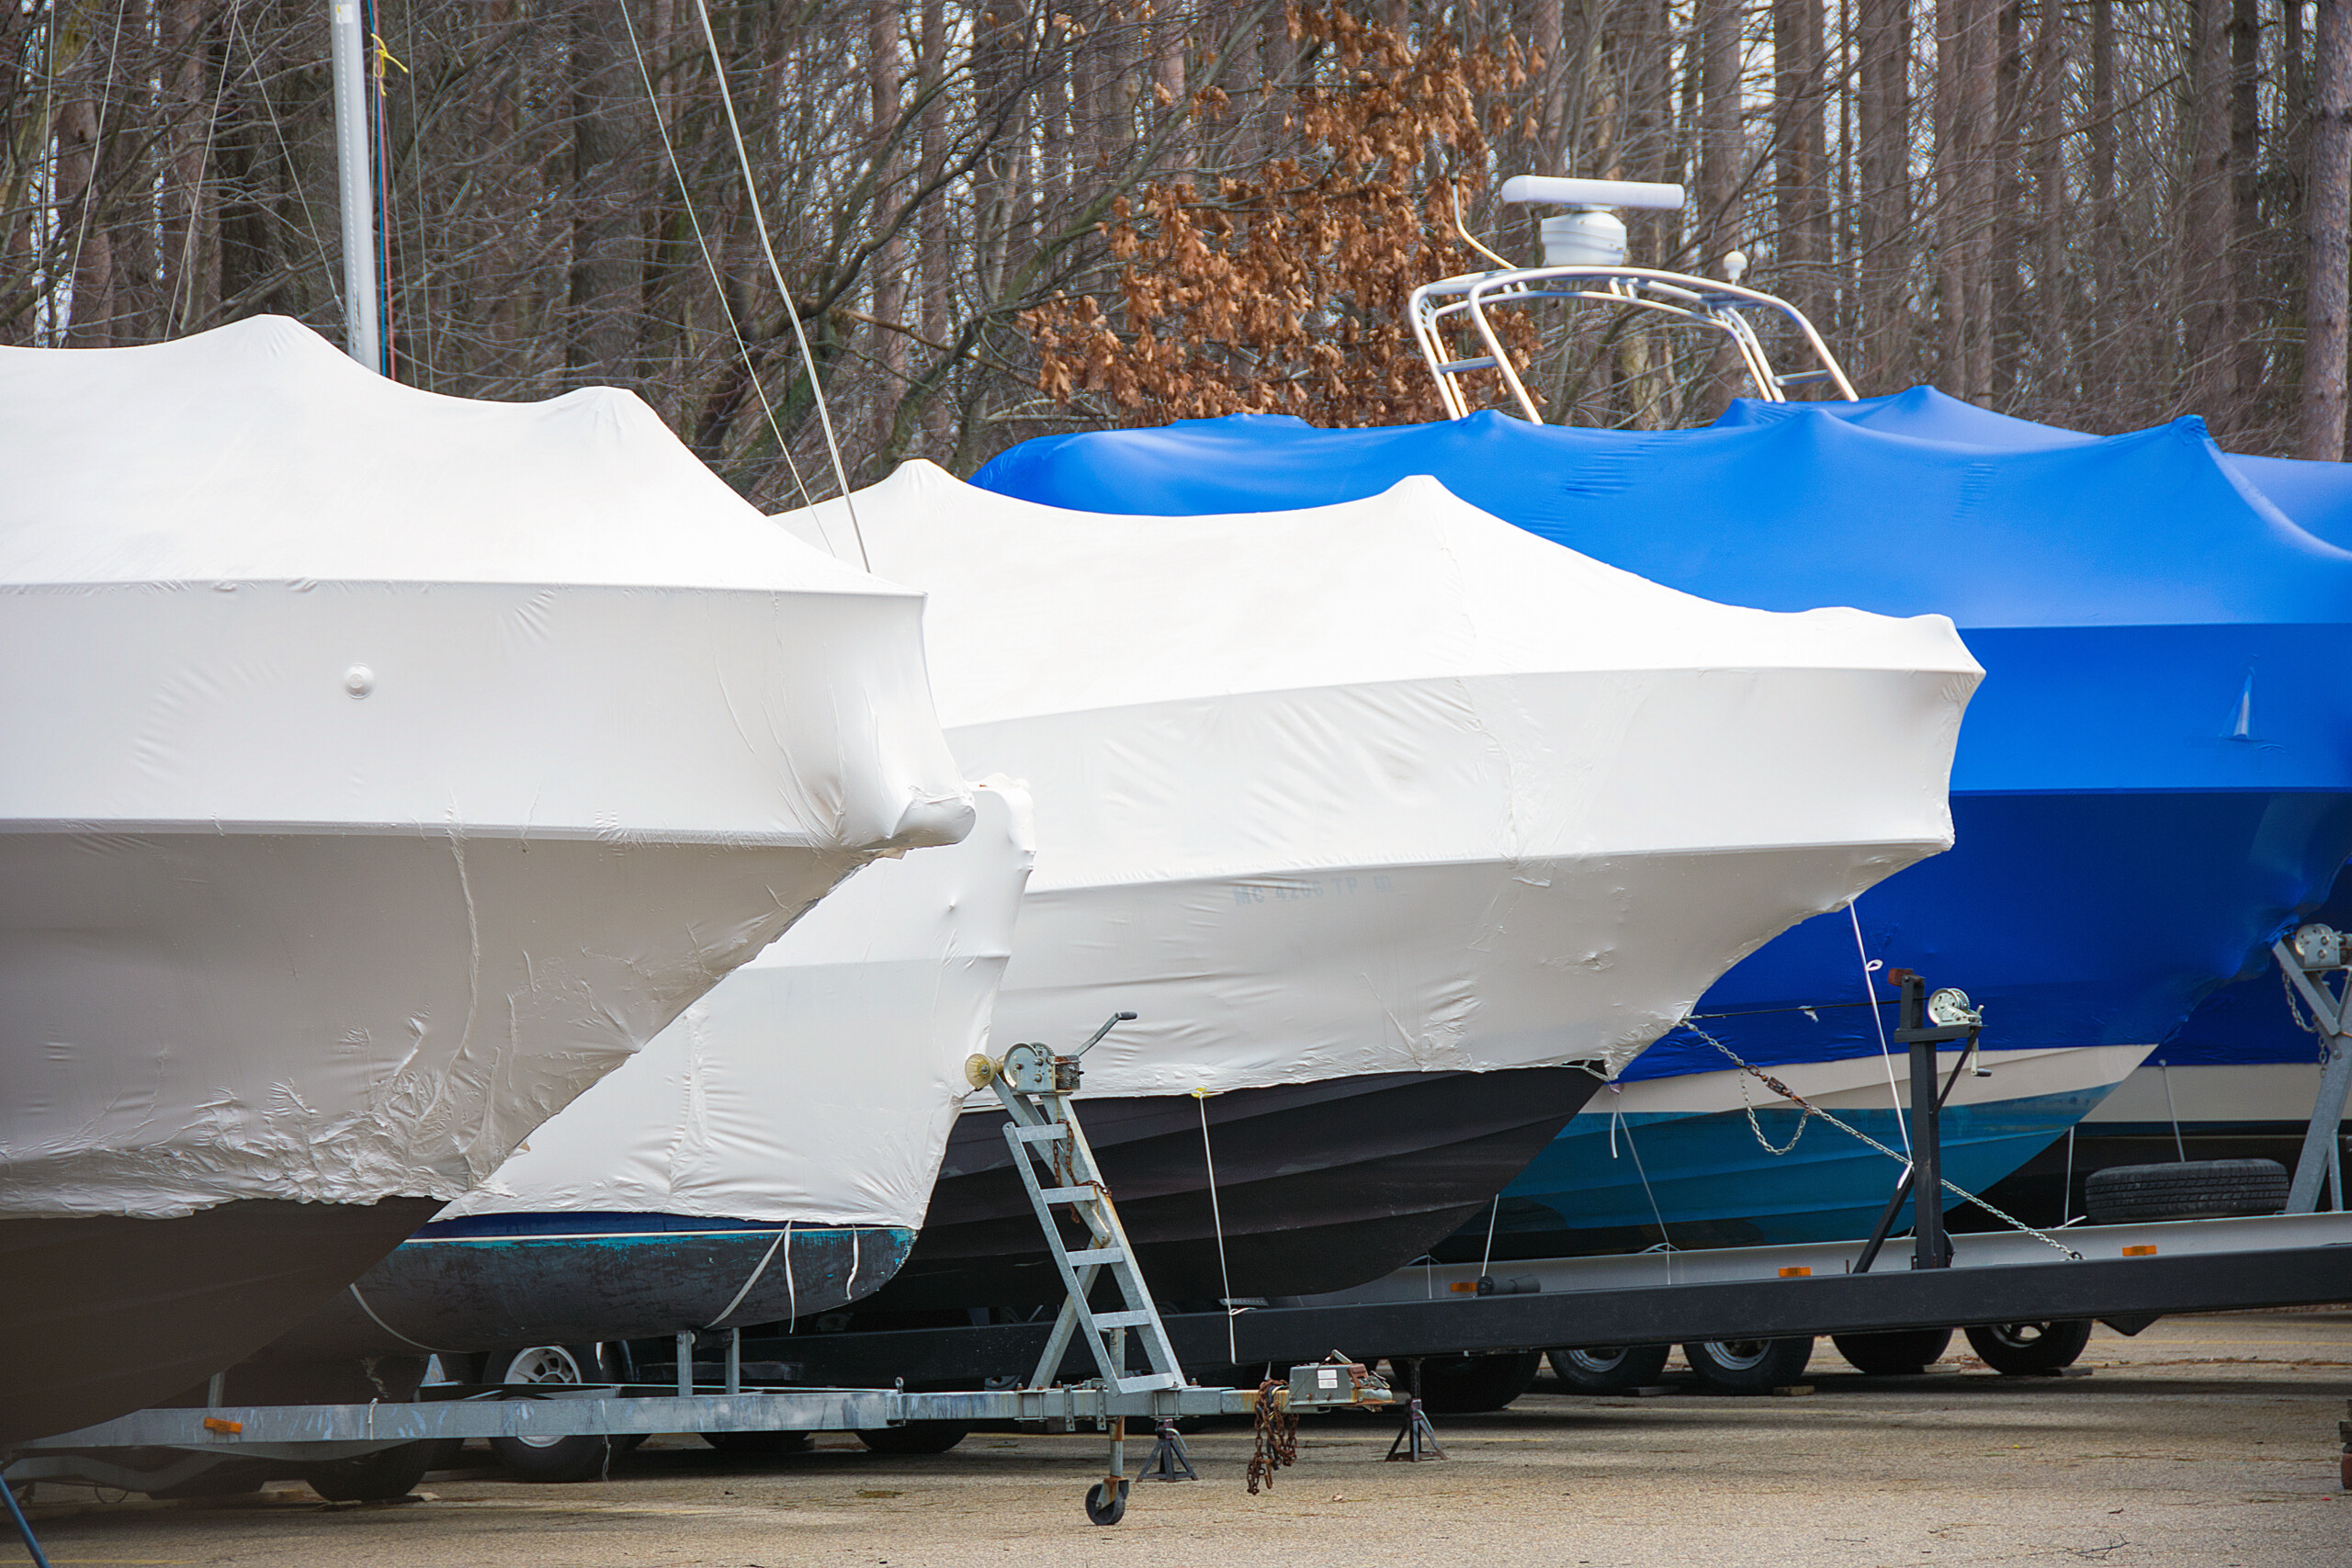 Outdoor boats Covered and Stored